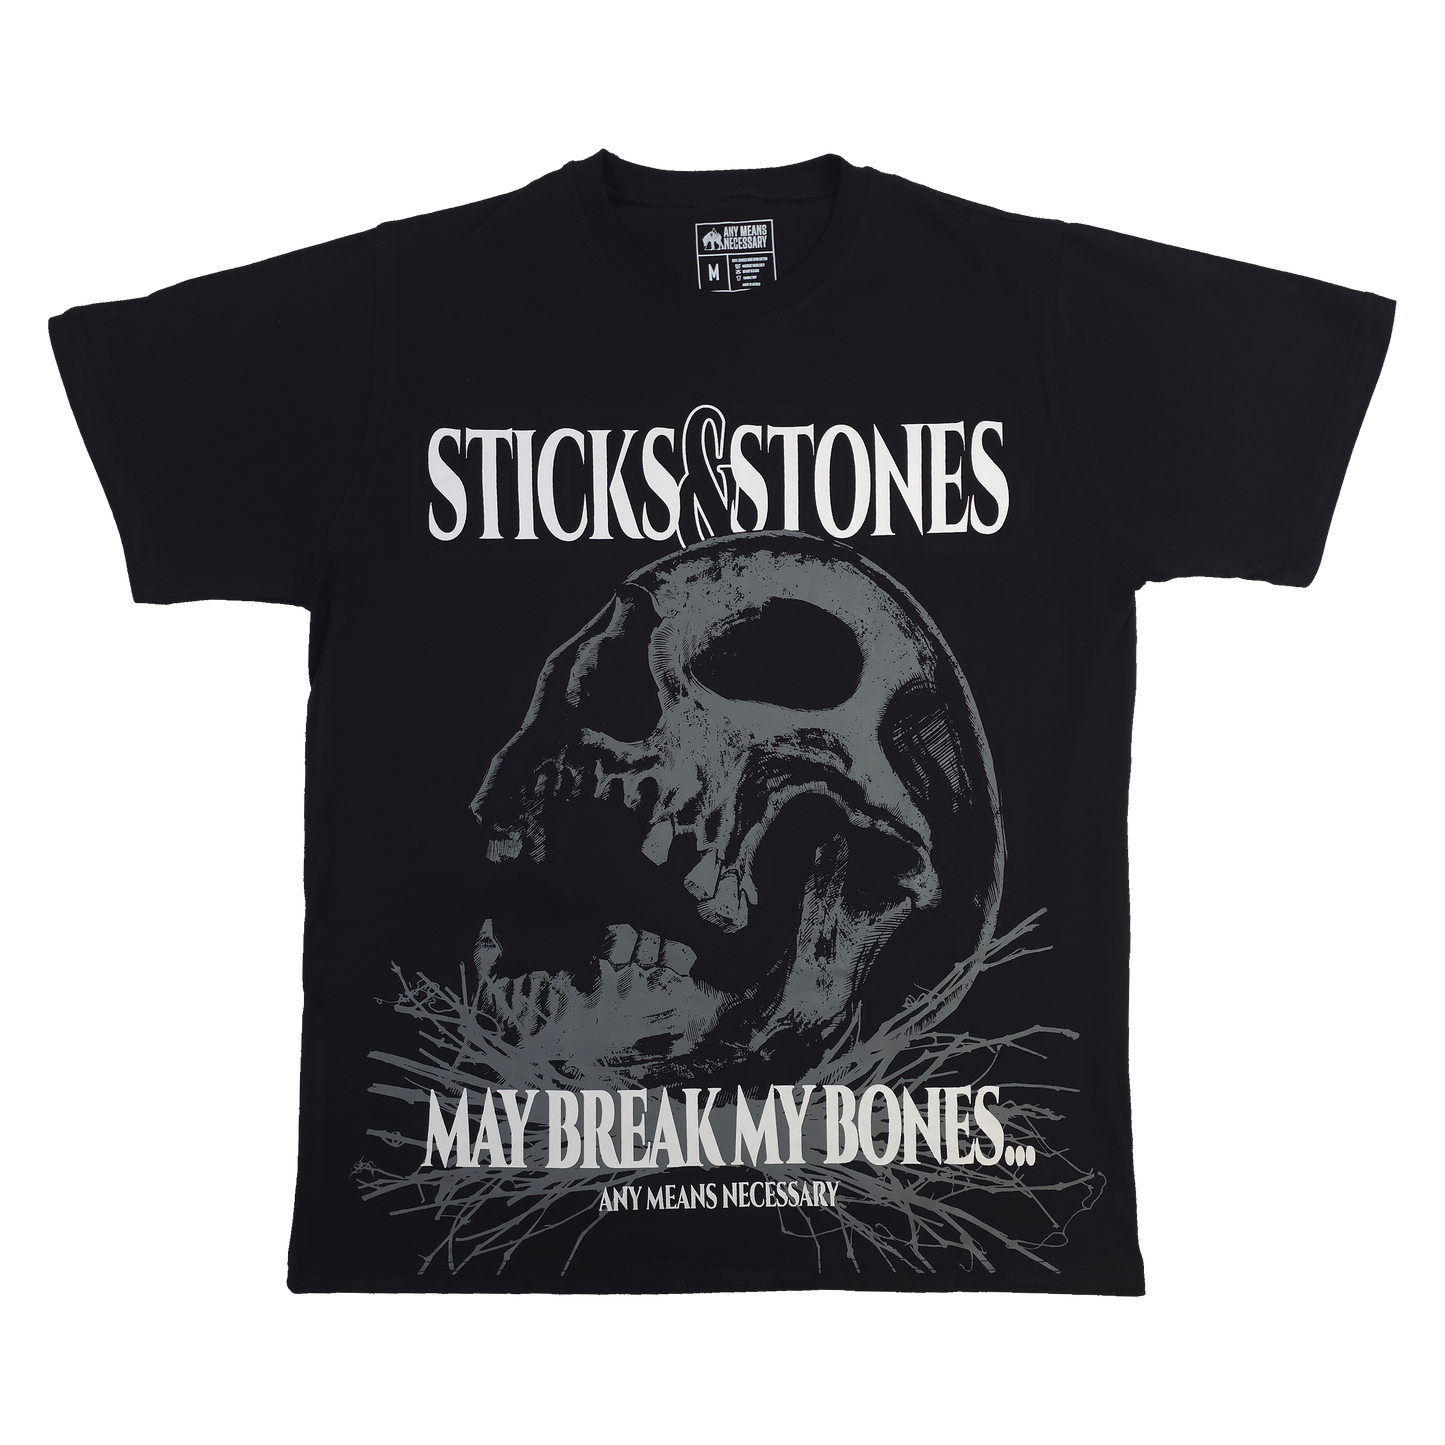 any means necessary shawn coss sticks and stones t shirt black